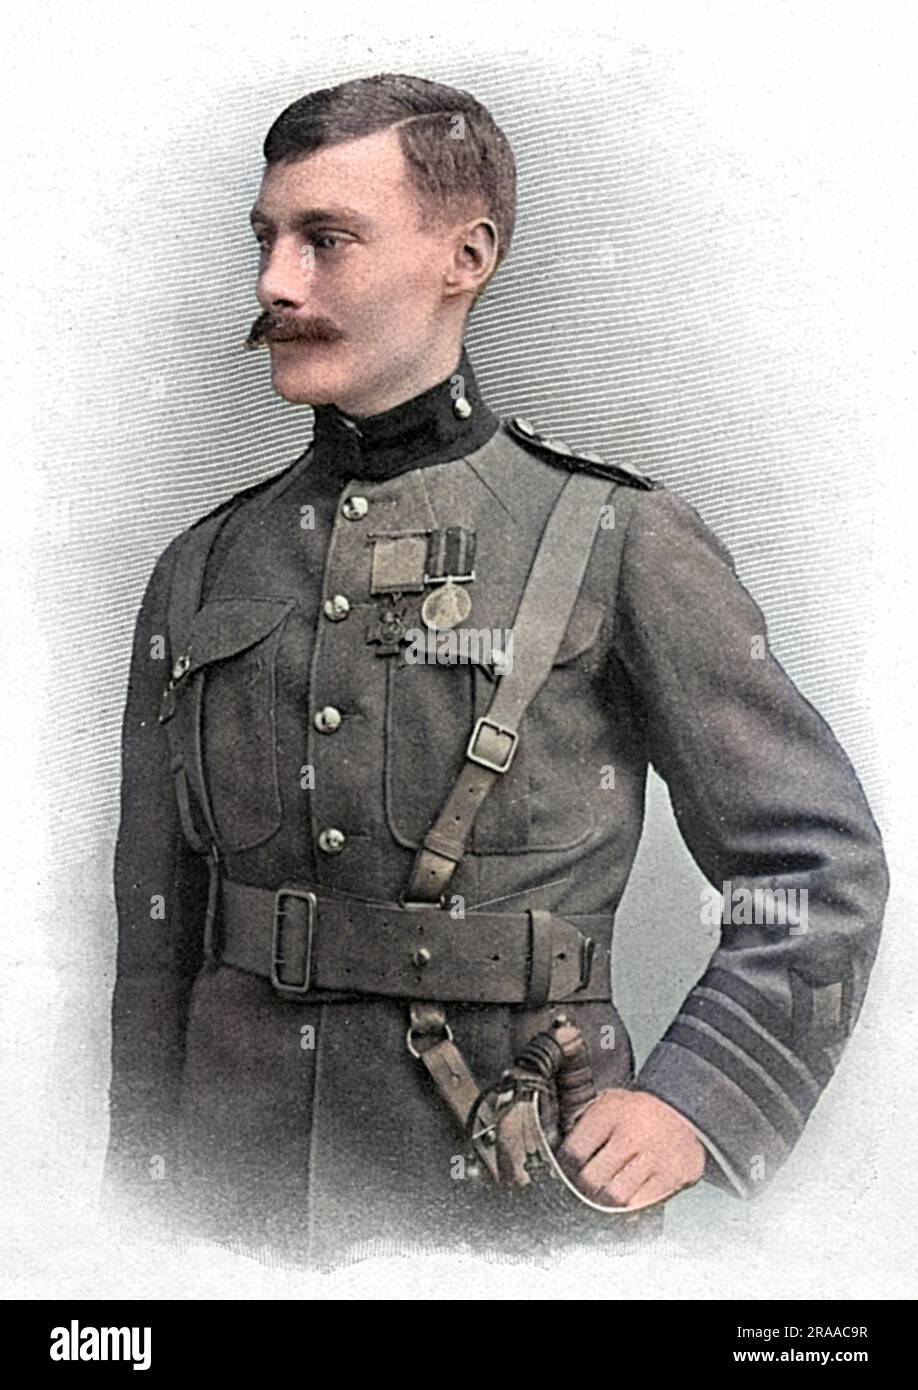 Lieutenant Colonel Arthur Martin-Leake, VC and Bar, VD, FRCS (4 April 1874 – 22 June 1953), English double recipient of the Victoria Cross.  He was first awarded the VC in 1902 during the Second Boer War.  While serving as a surgeon-captain in the South African Constabulary, he treated wounded soldiers under fire during an action at Vlakfontein.  He was shot three times and refused water until his comrades had been offered some.  He won his second V.C. at the age of 40 in November 1914 while serving with Royal Army Medical Corps near Zonnebeke, Belgium.  He rescued a number of wounded soldiers Stock Photo